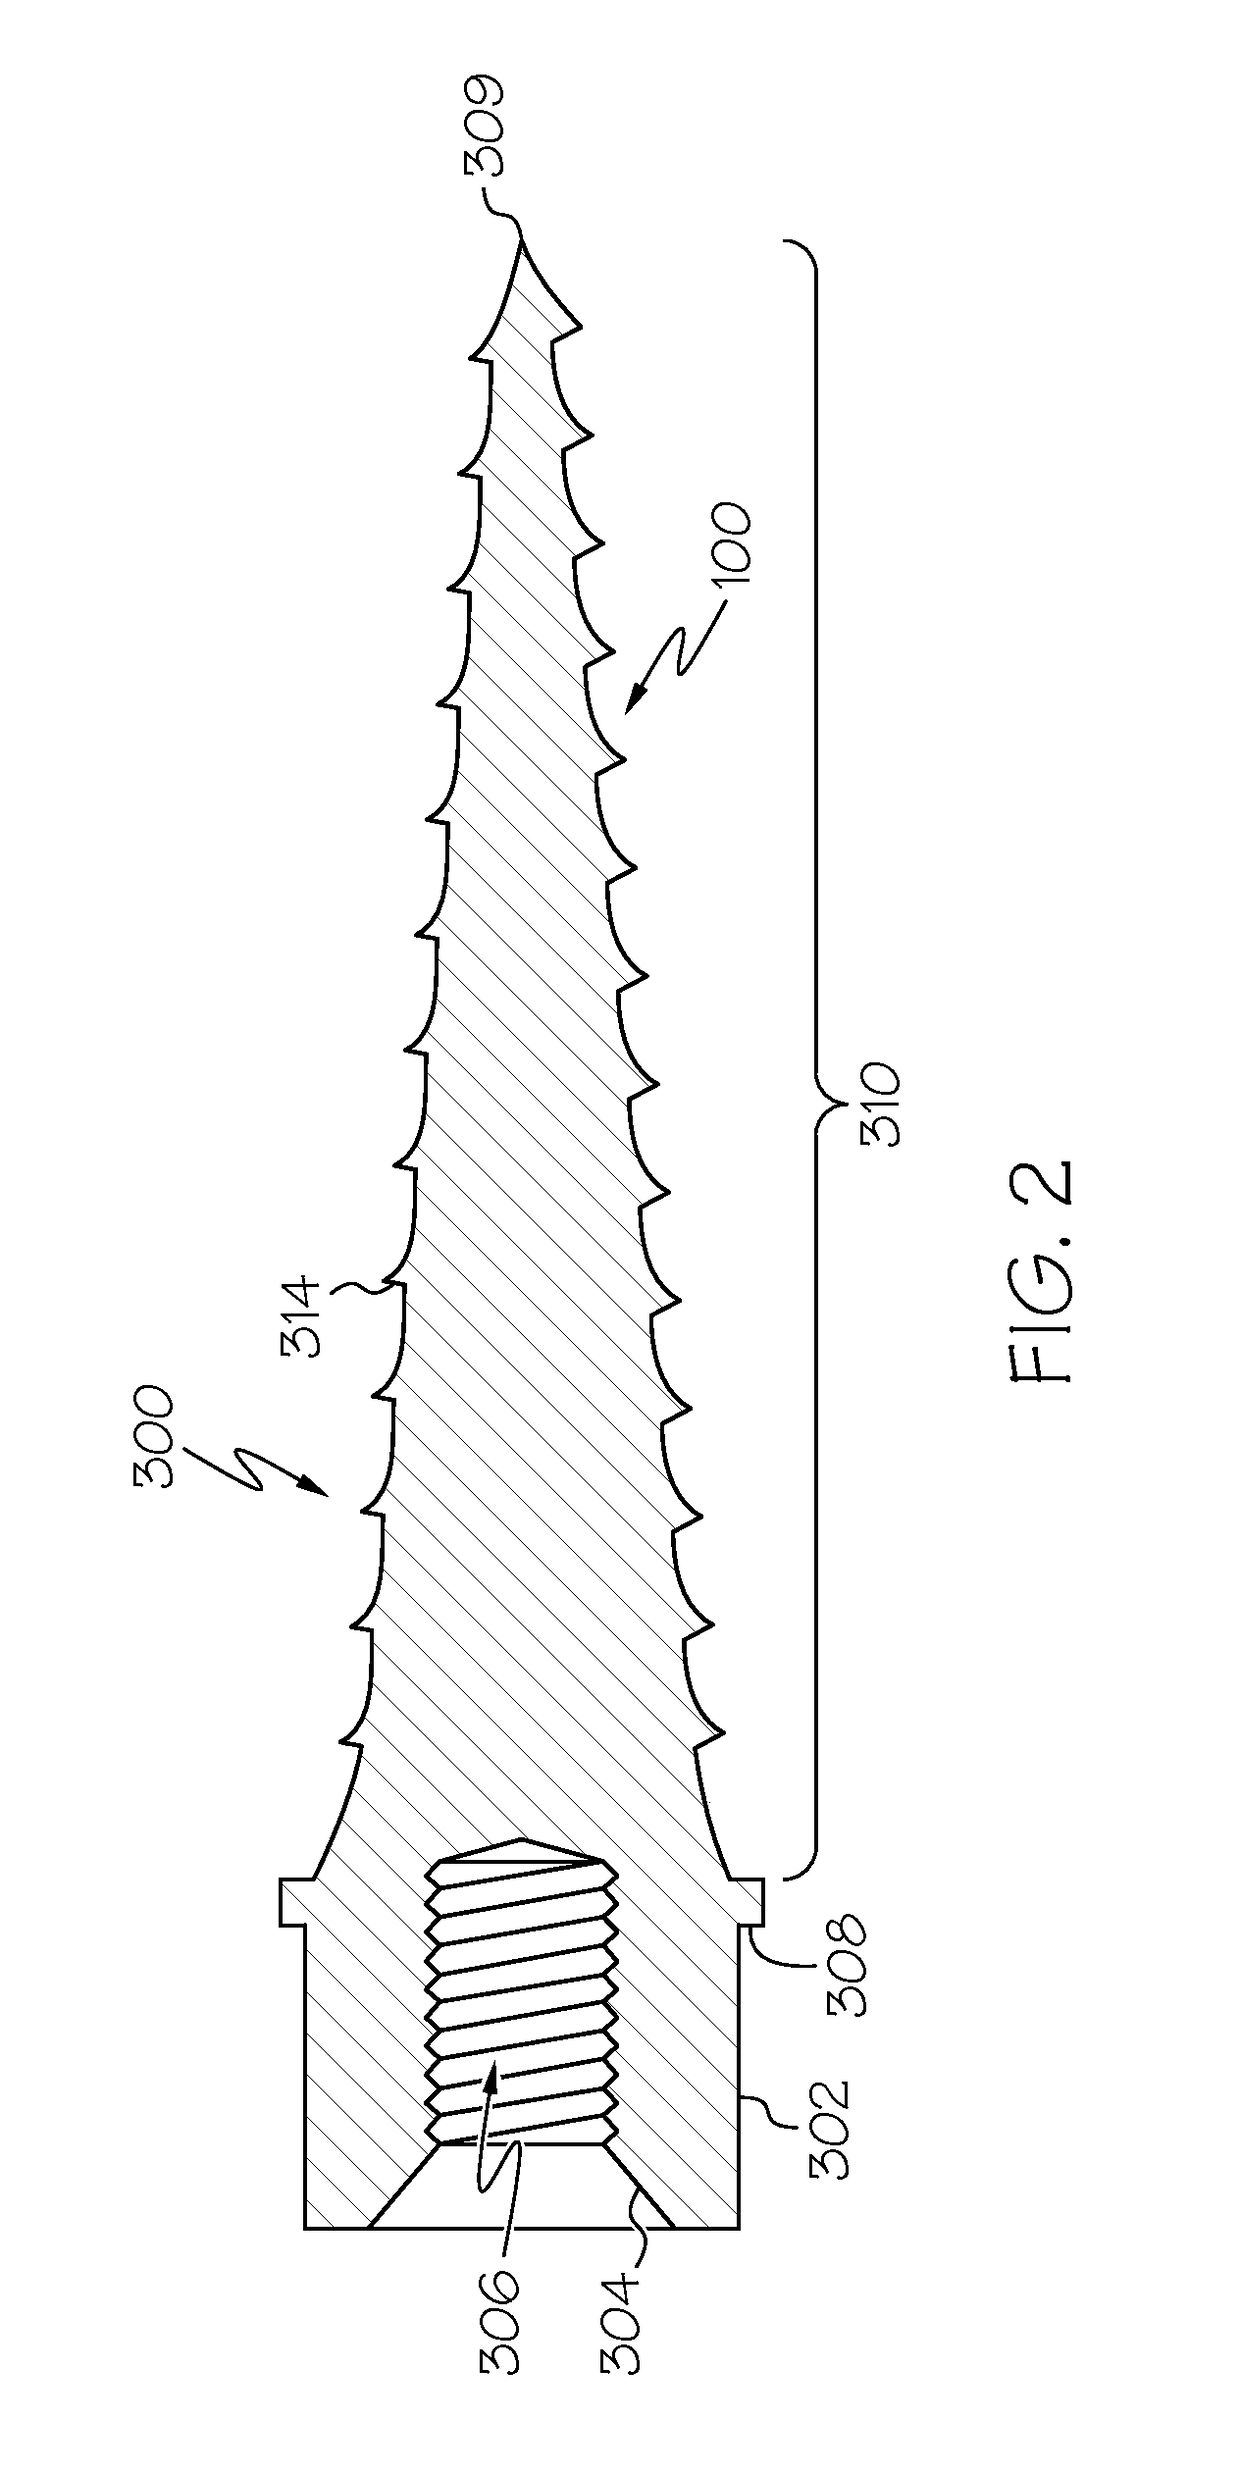 Hybrid temporary anchorage device implant system and associated methods